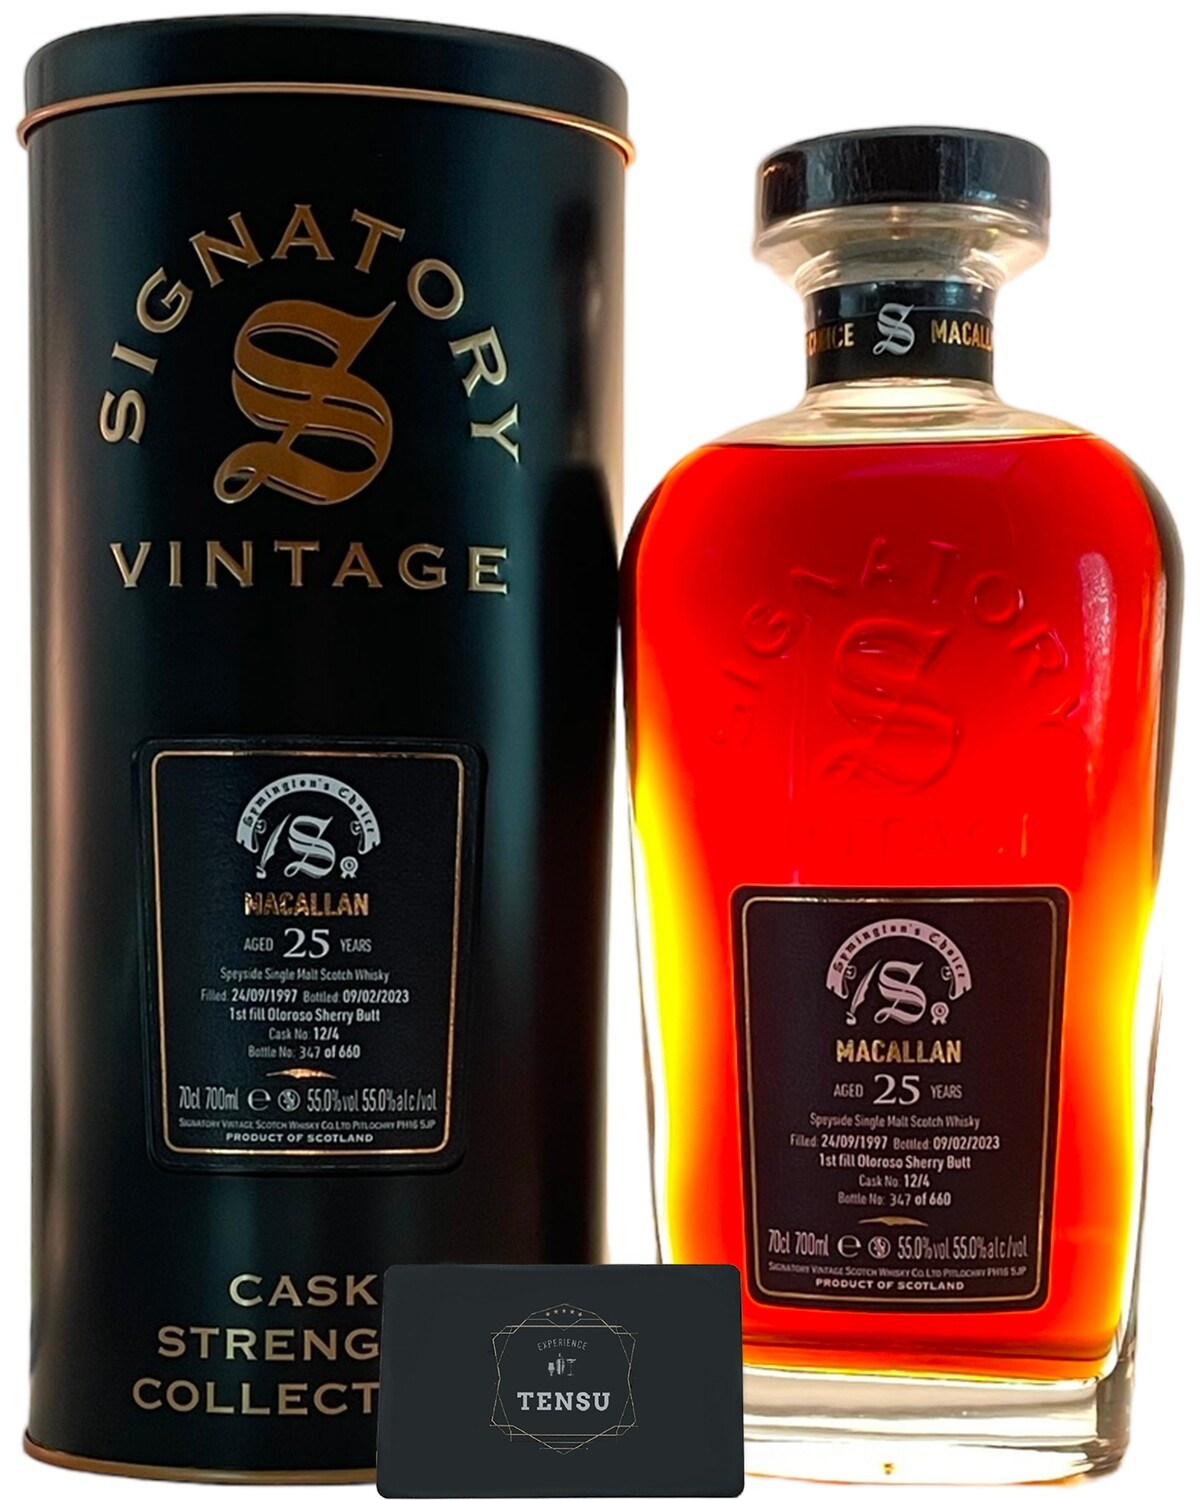 Macallan 25 Years Old (1997-2023) 1st Fill Oloroso Sherry Butt 55.0 CSC "Signatory"